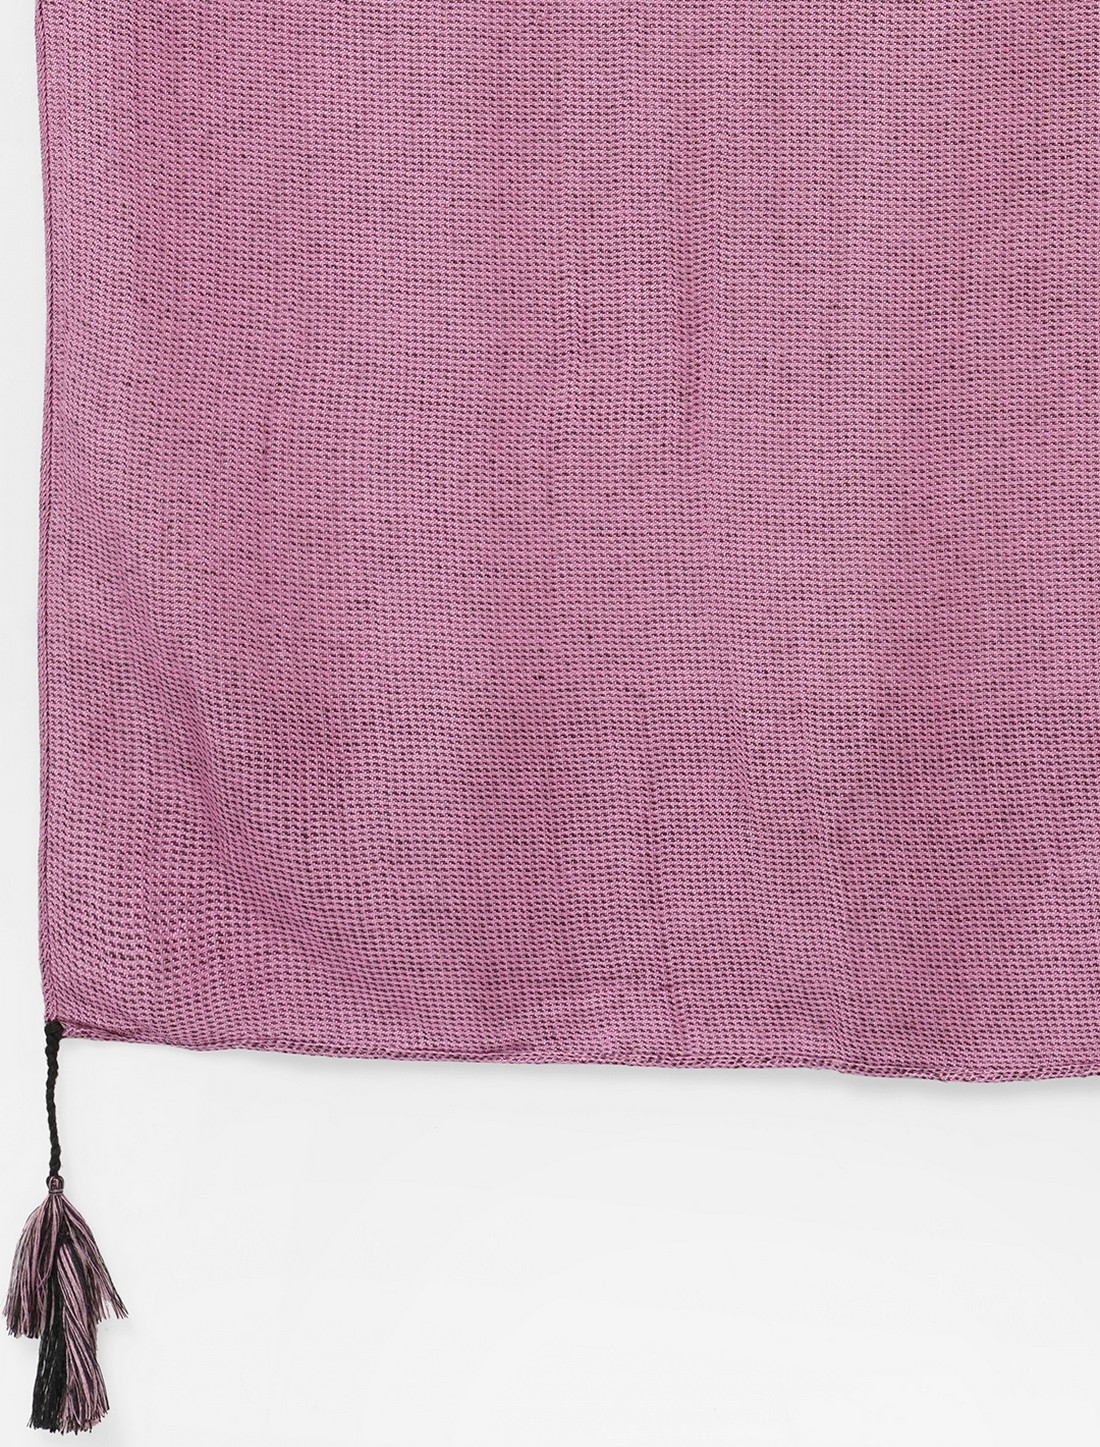 Get Wrapped | Get Wrapped Pink Dotted Scarves with Tassels 3